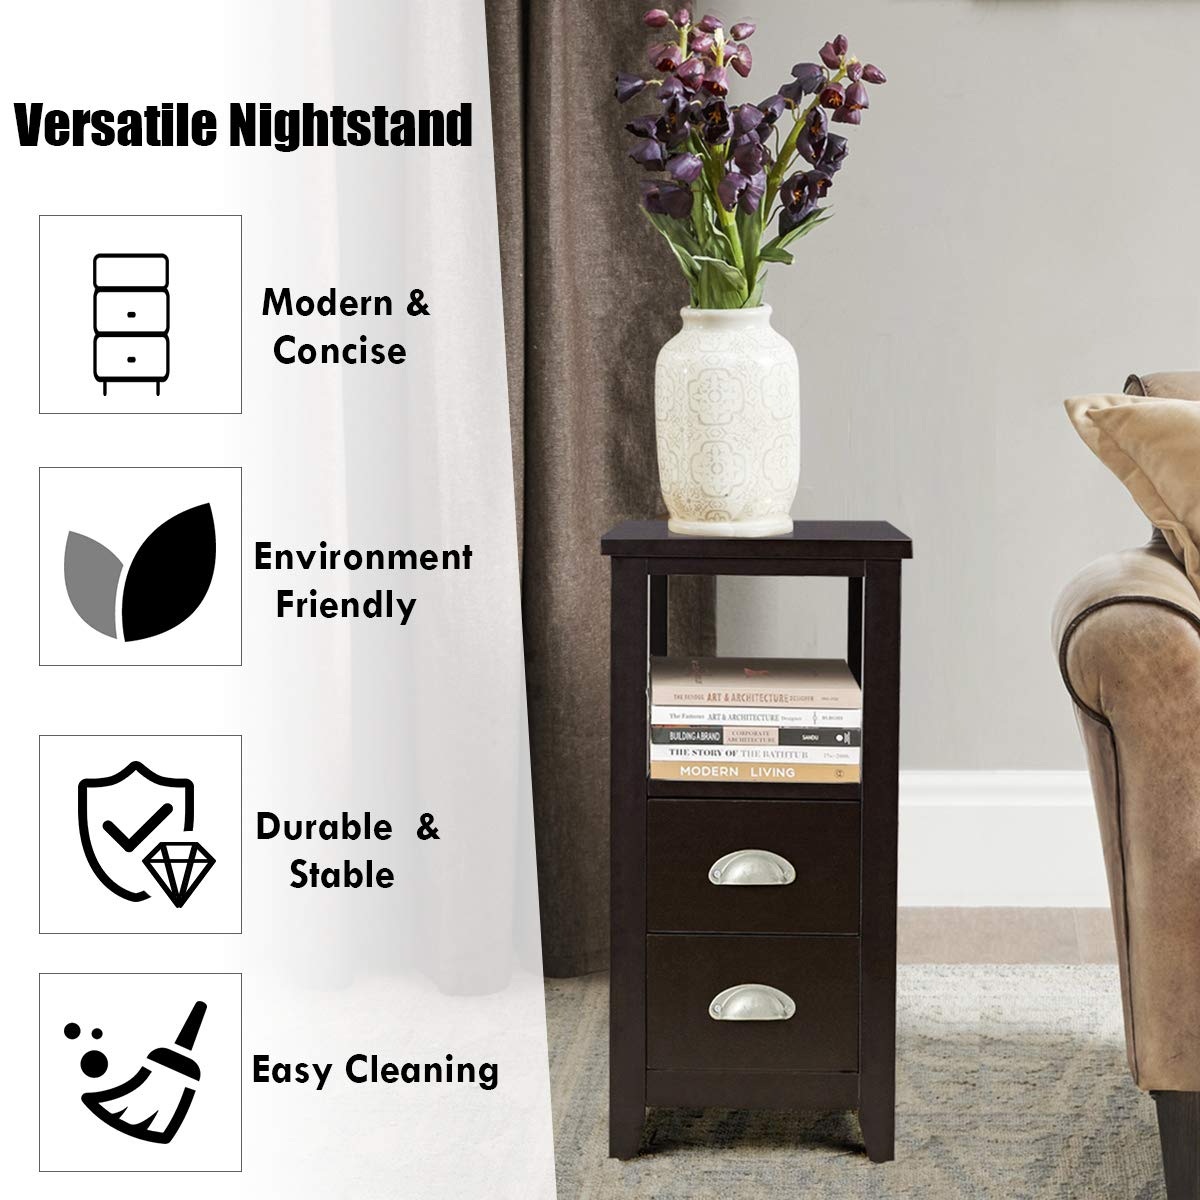 Giantex End Table Wooden W/ 2 Drawers and Shelf Space-Saving Rectangular Bedside Table